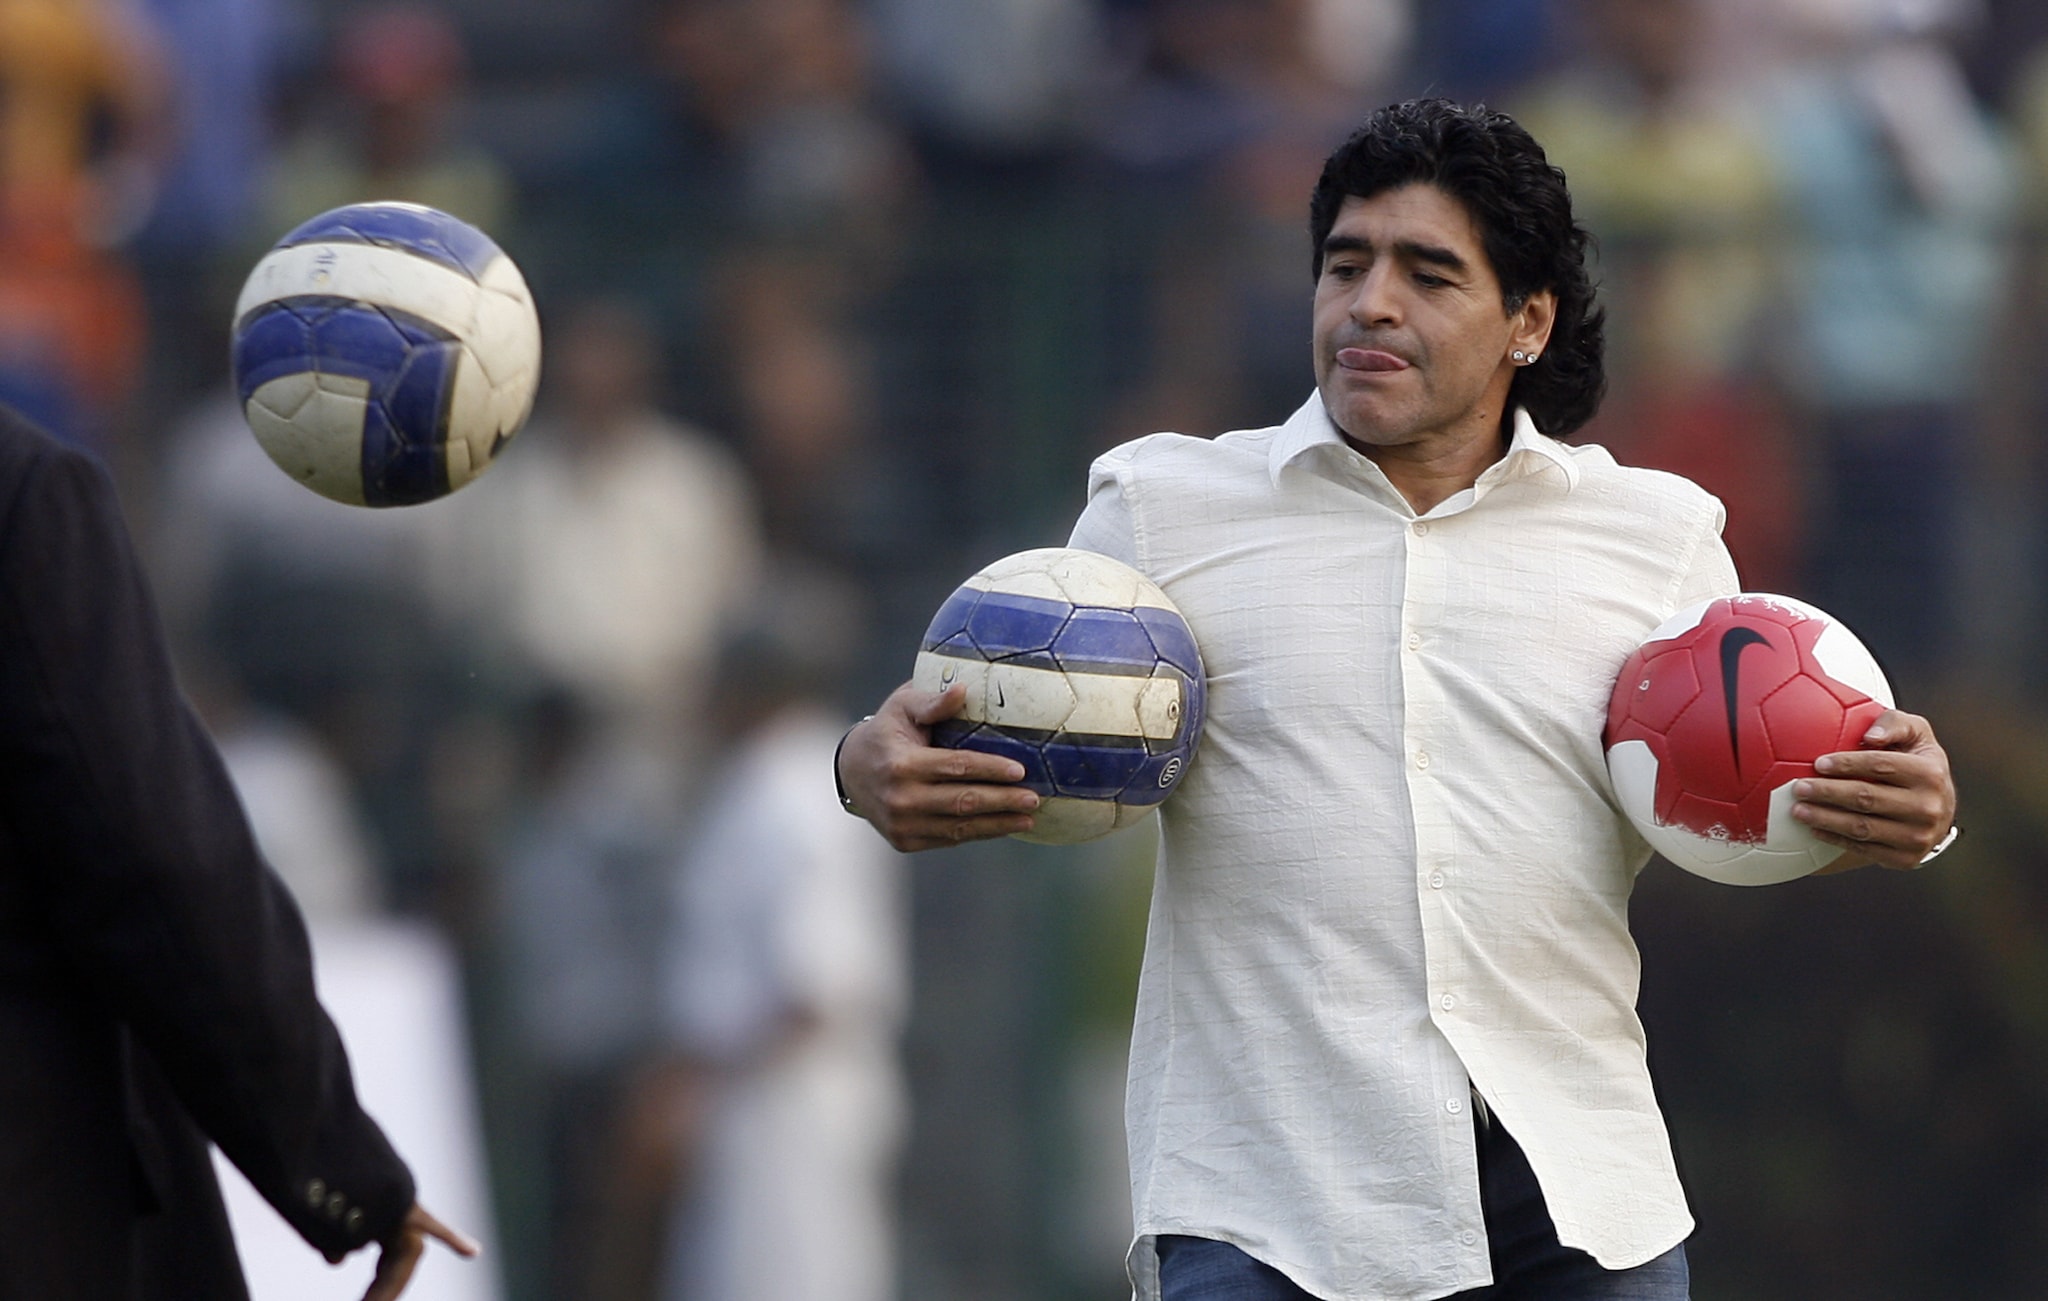  Argentina's national team coach and former soccer star Diego Armando Maradona demonstrates his skills while attending an event at the Mohun Bagan club, in Kolkata on December 7, 2008. Soccer superstar Diego Maradona said he was greatly touched by the frenzy over his brief visit here and promised to come back to India again in future. (Photo: AFP)